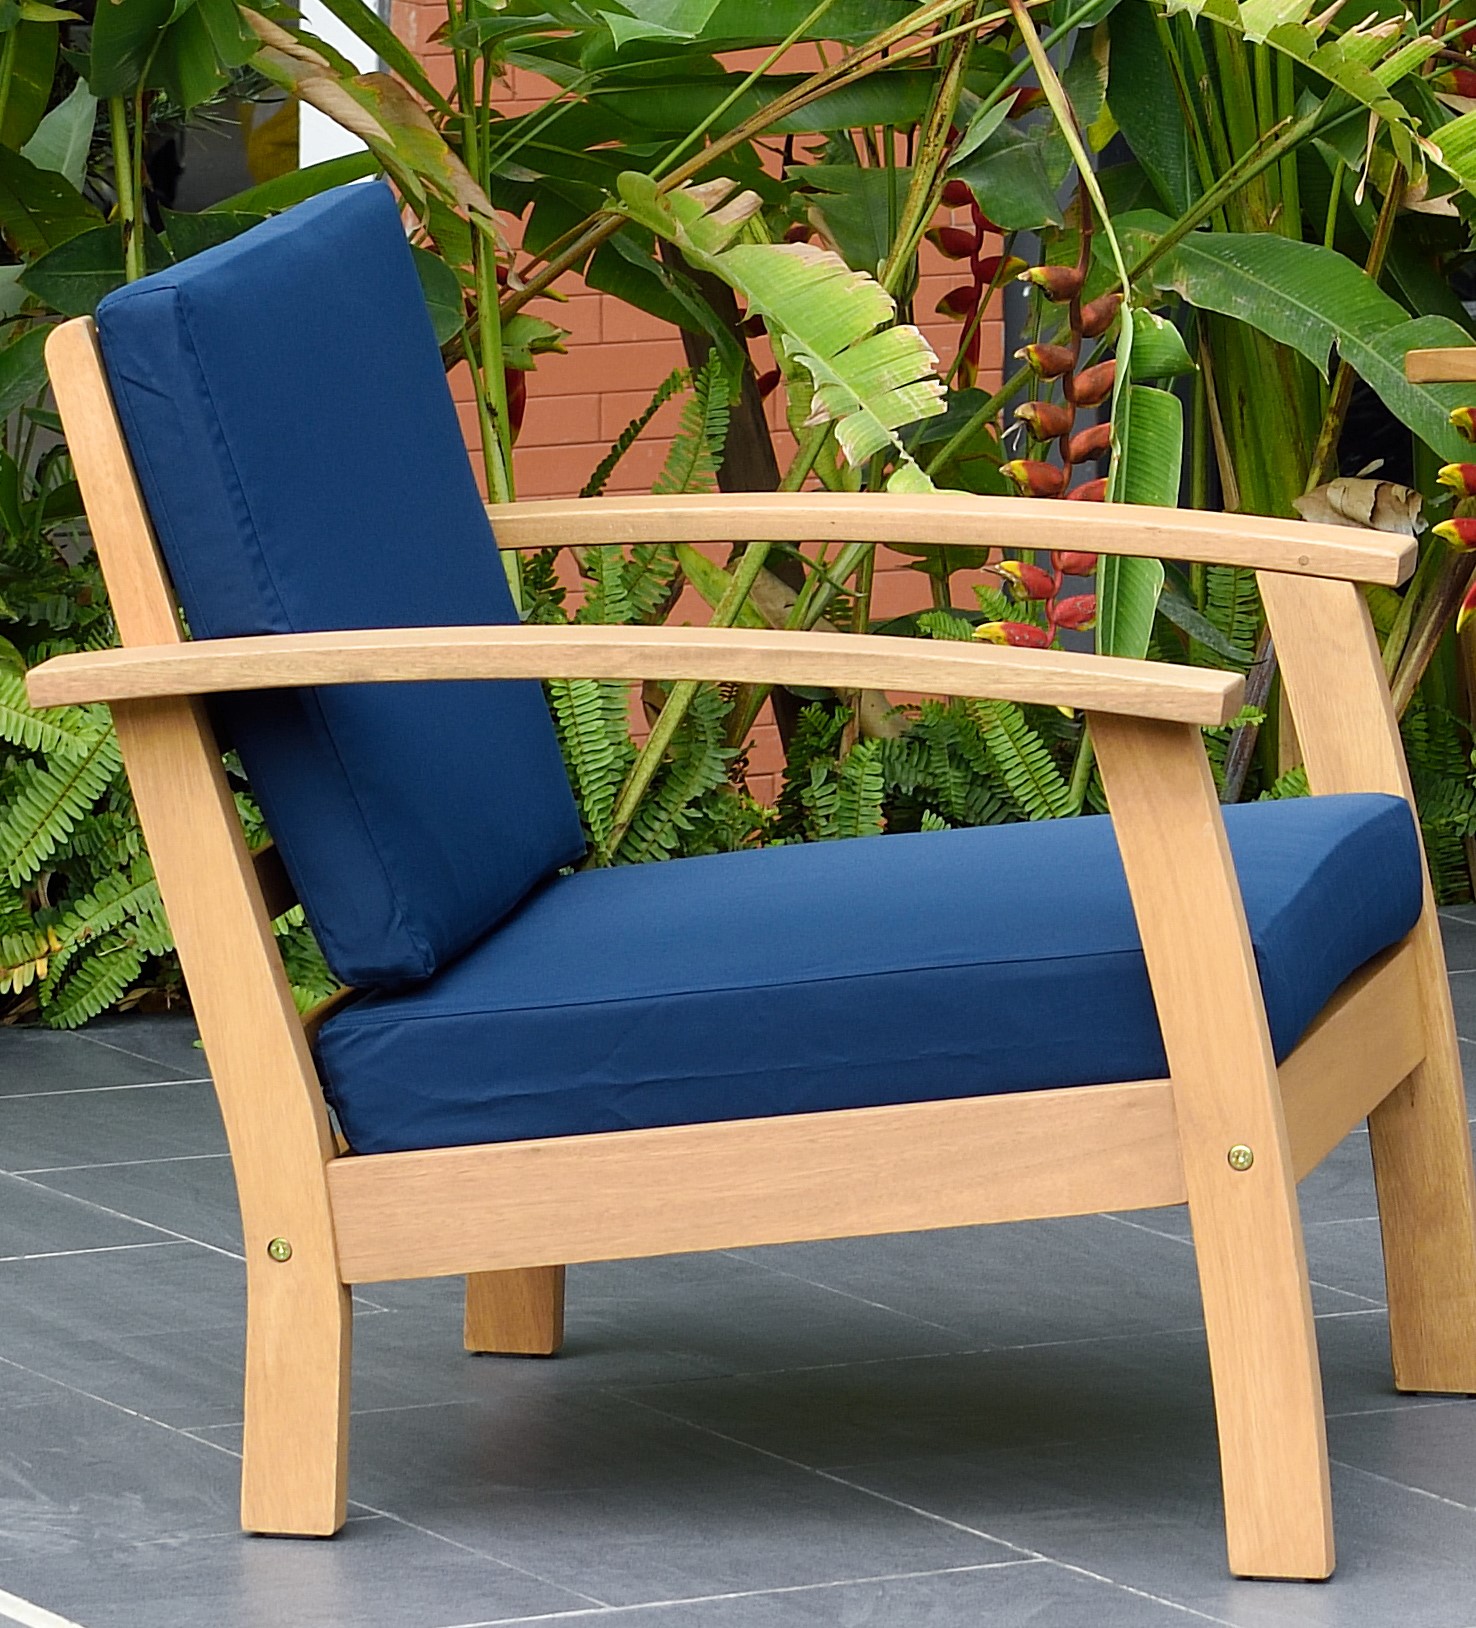 Amazonia Montein Teak Finish 4 Pieces Patio Conversation Set with Comfortable Cushions, Blue - image 3 of 10